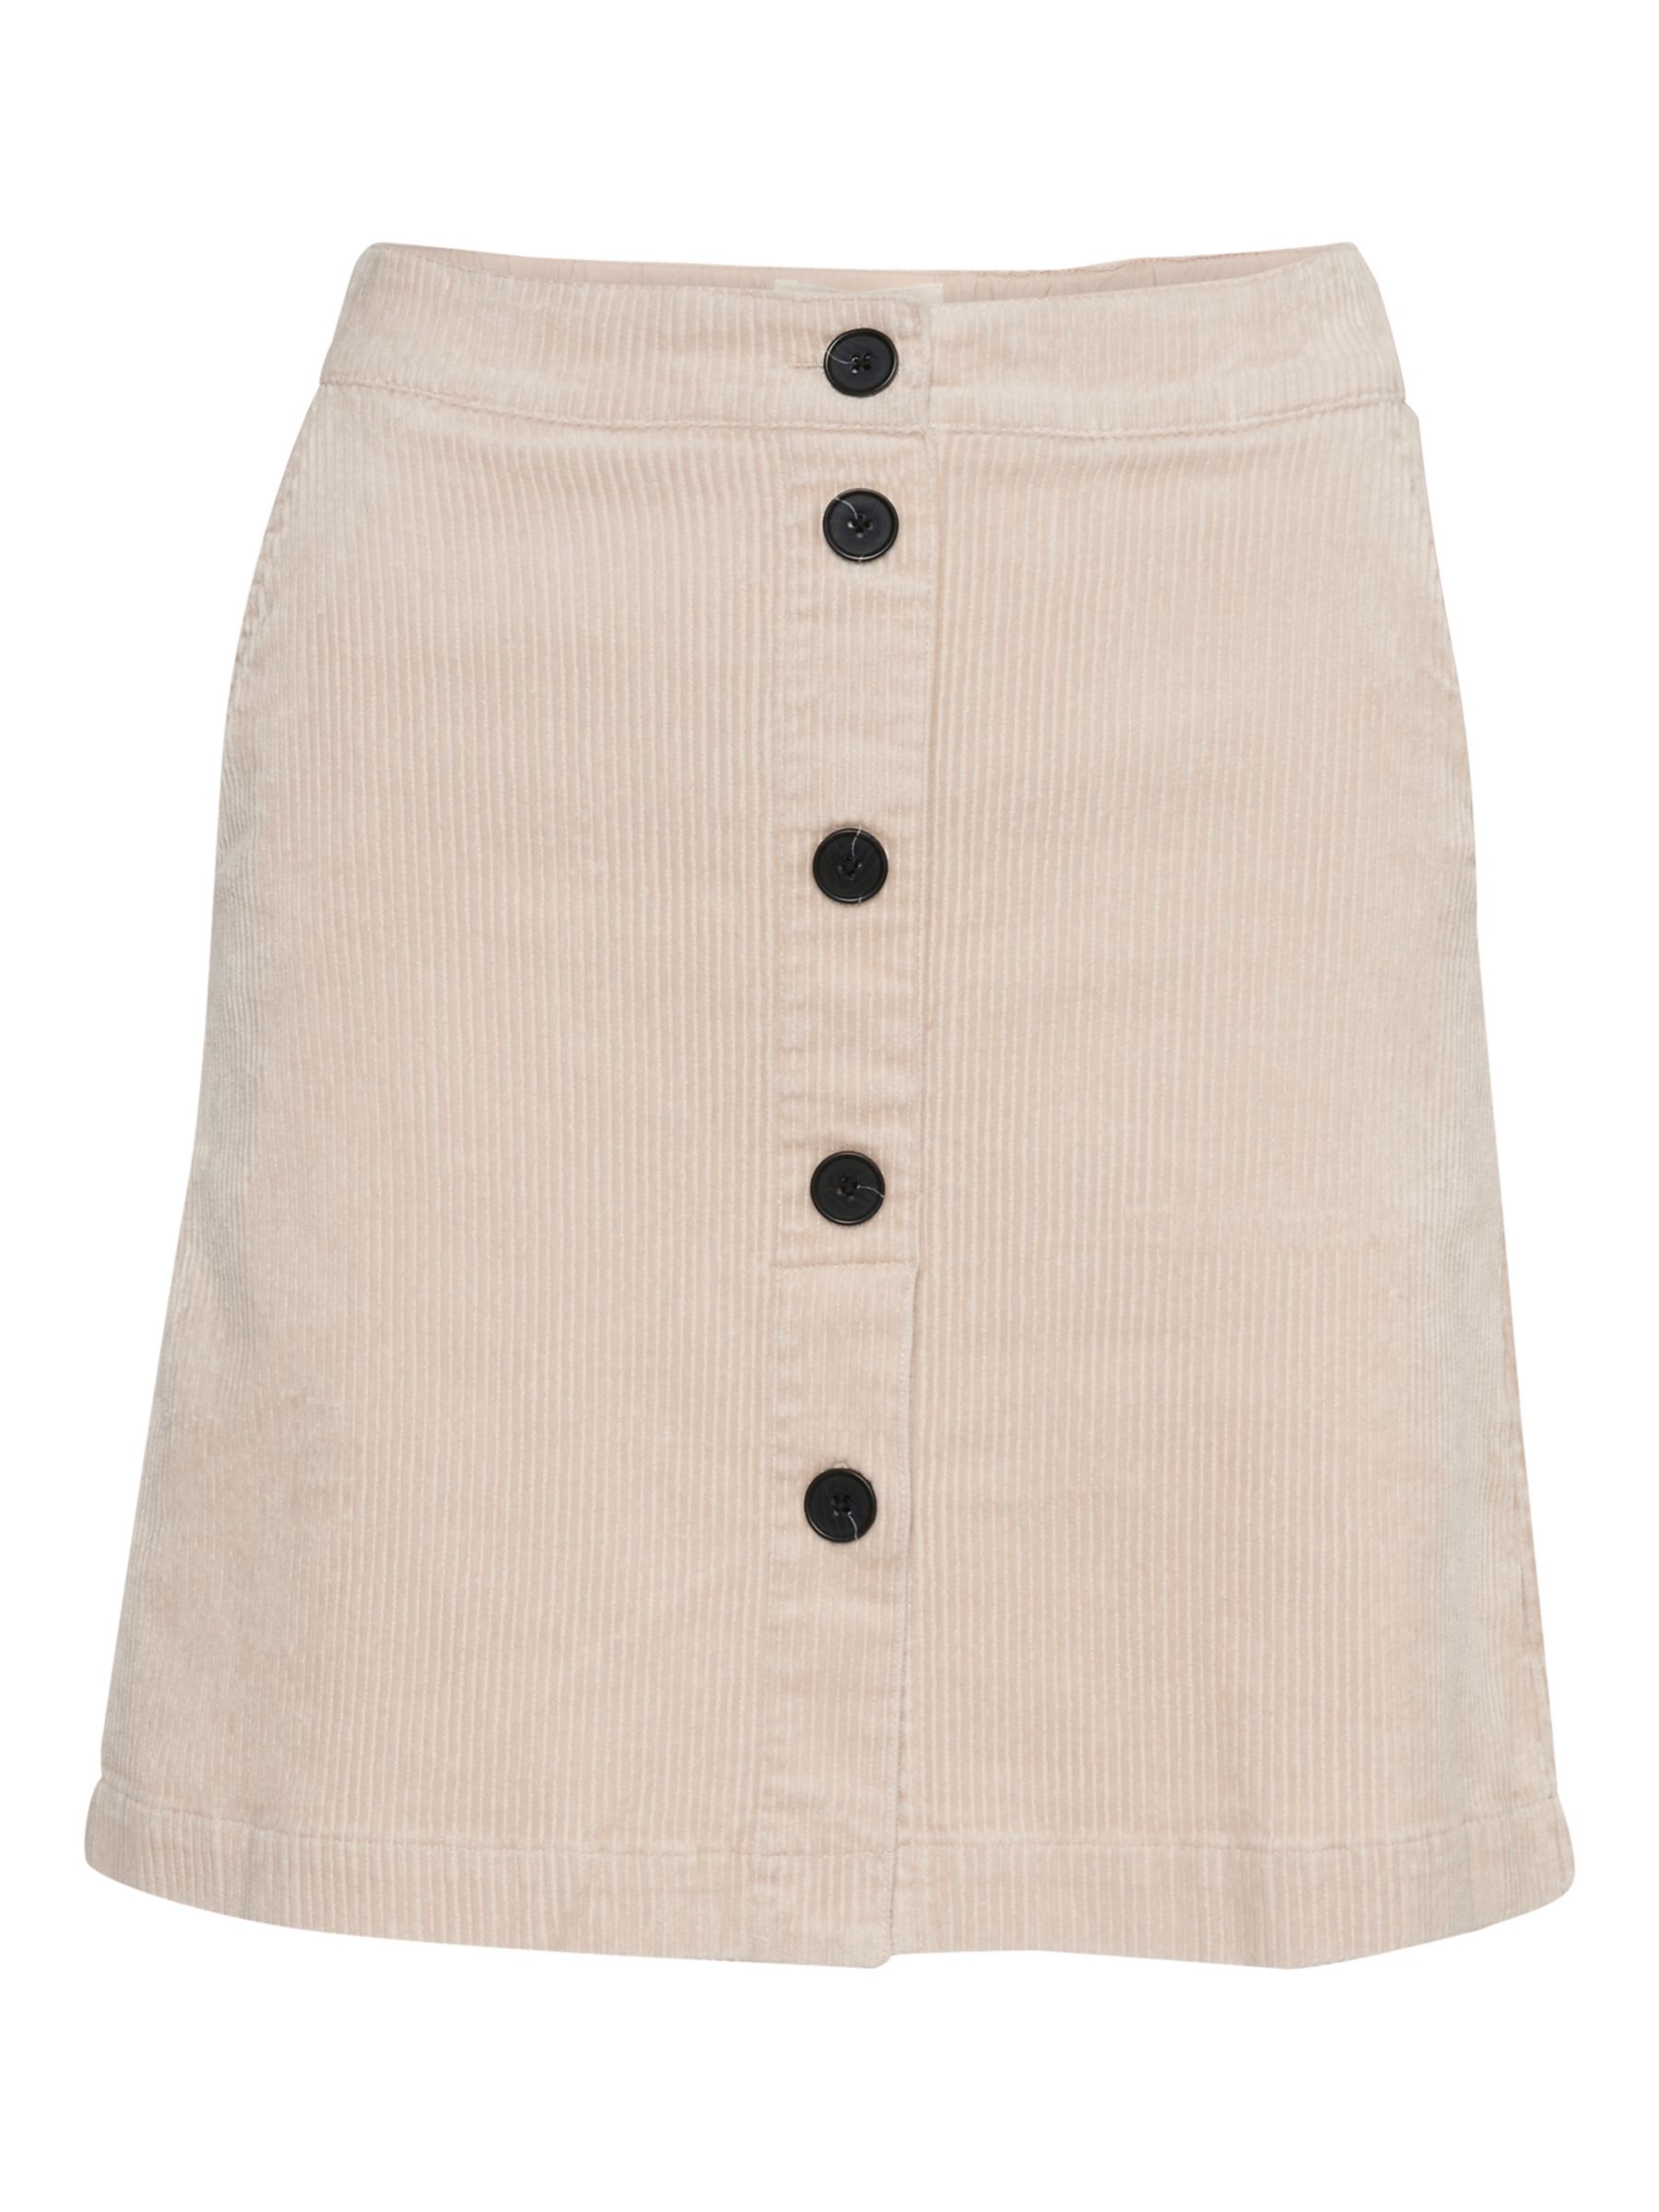 Buy Part Two Valentine A-Line Mini Skirt, Perfectly Pale Online at johnlewis.com